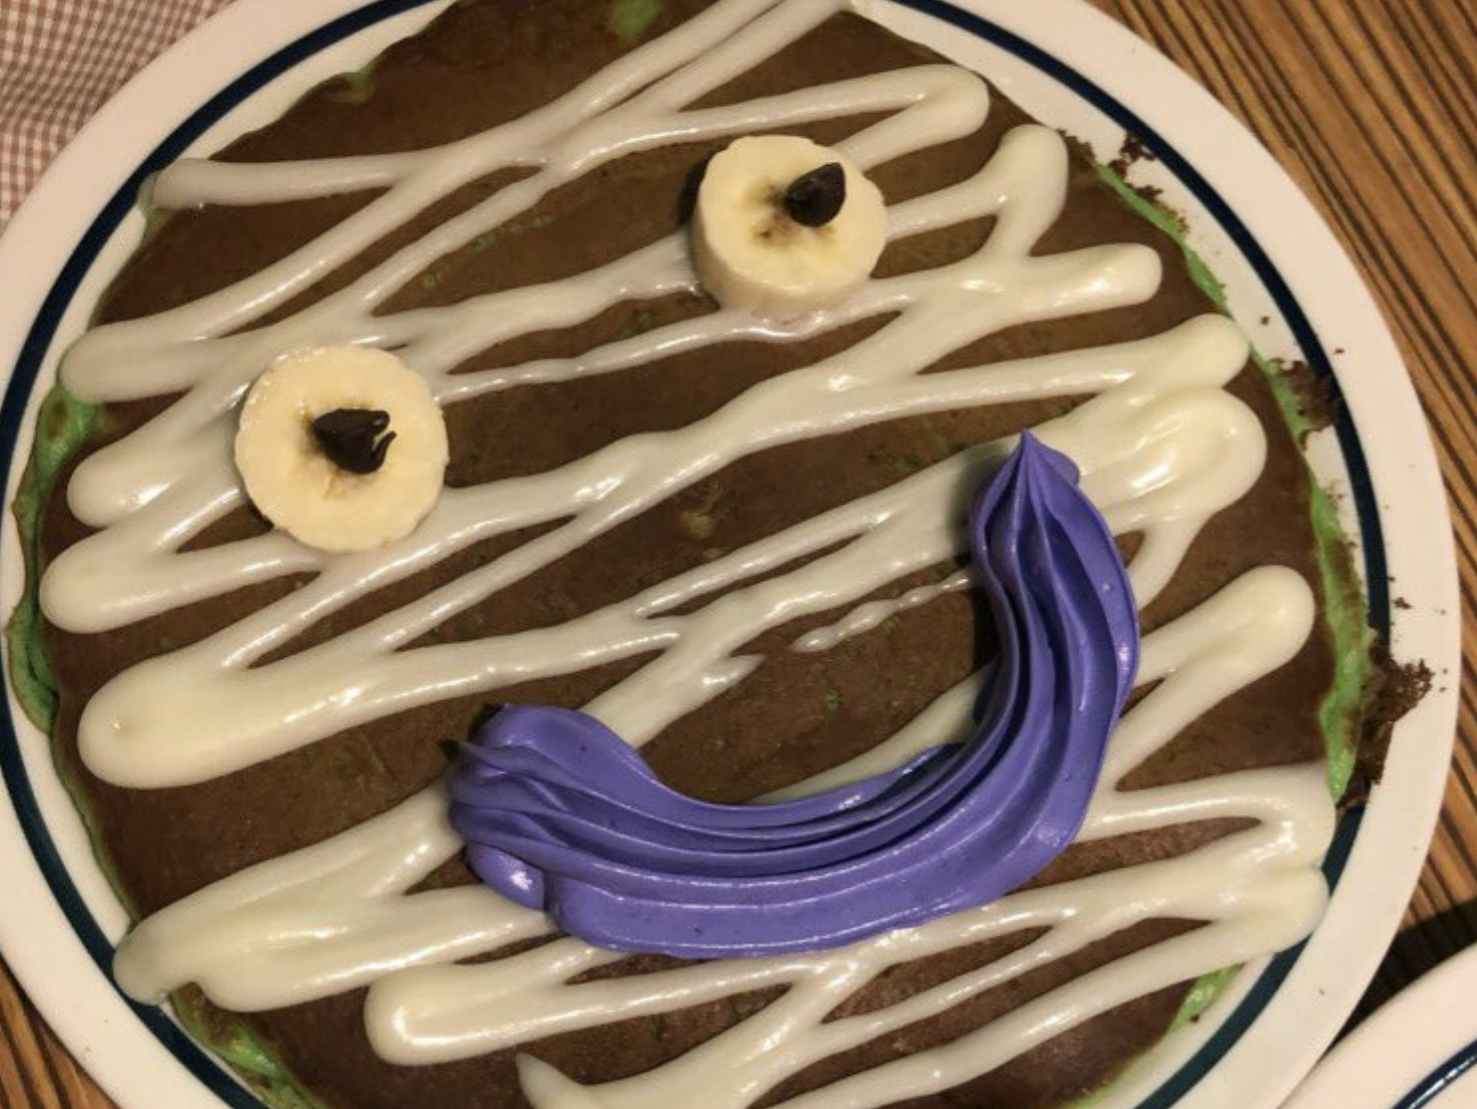 IHOP Celebrating Halloween With a Dreadfully Delicious Tie-In